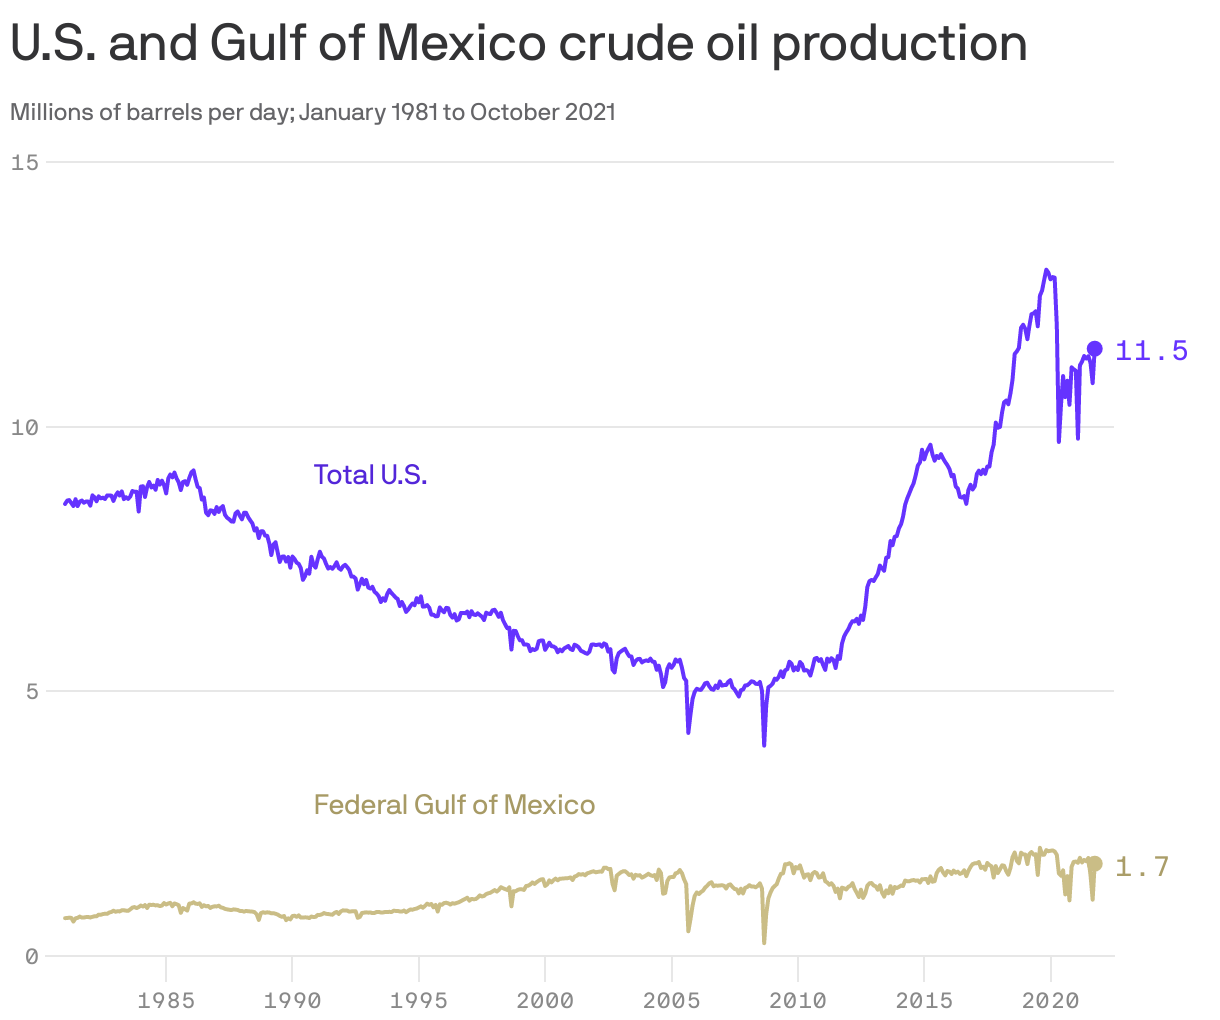 U.S. and Gulf of Mexico crude oil production